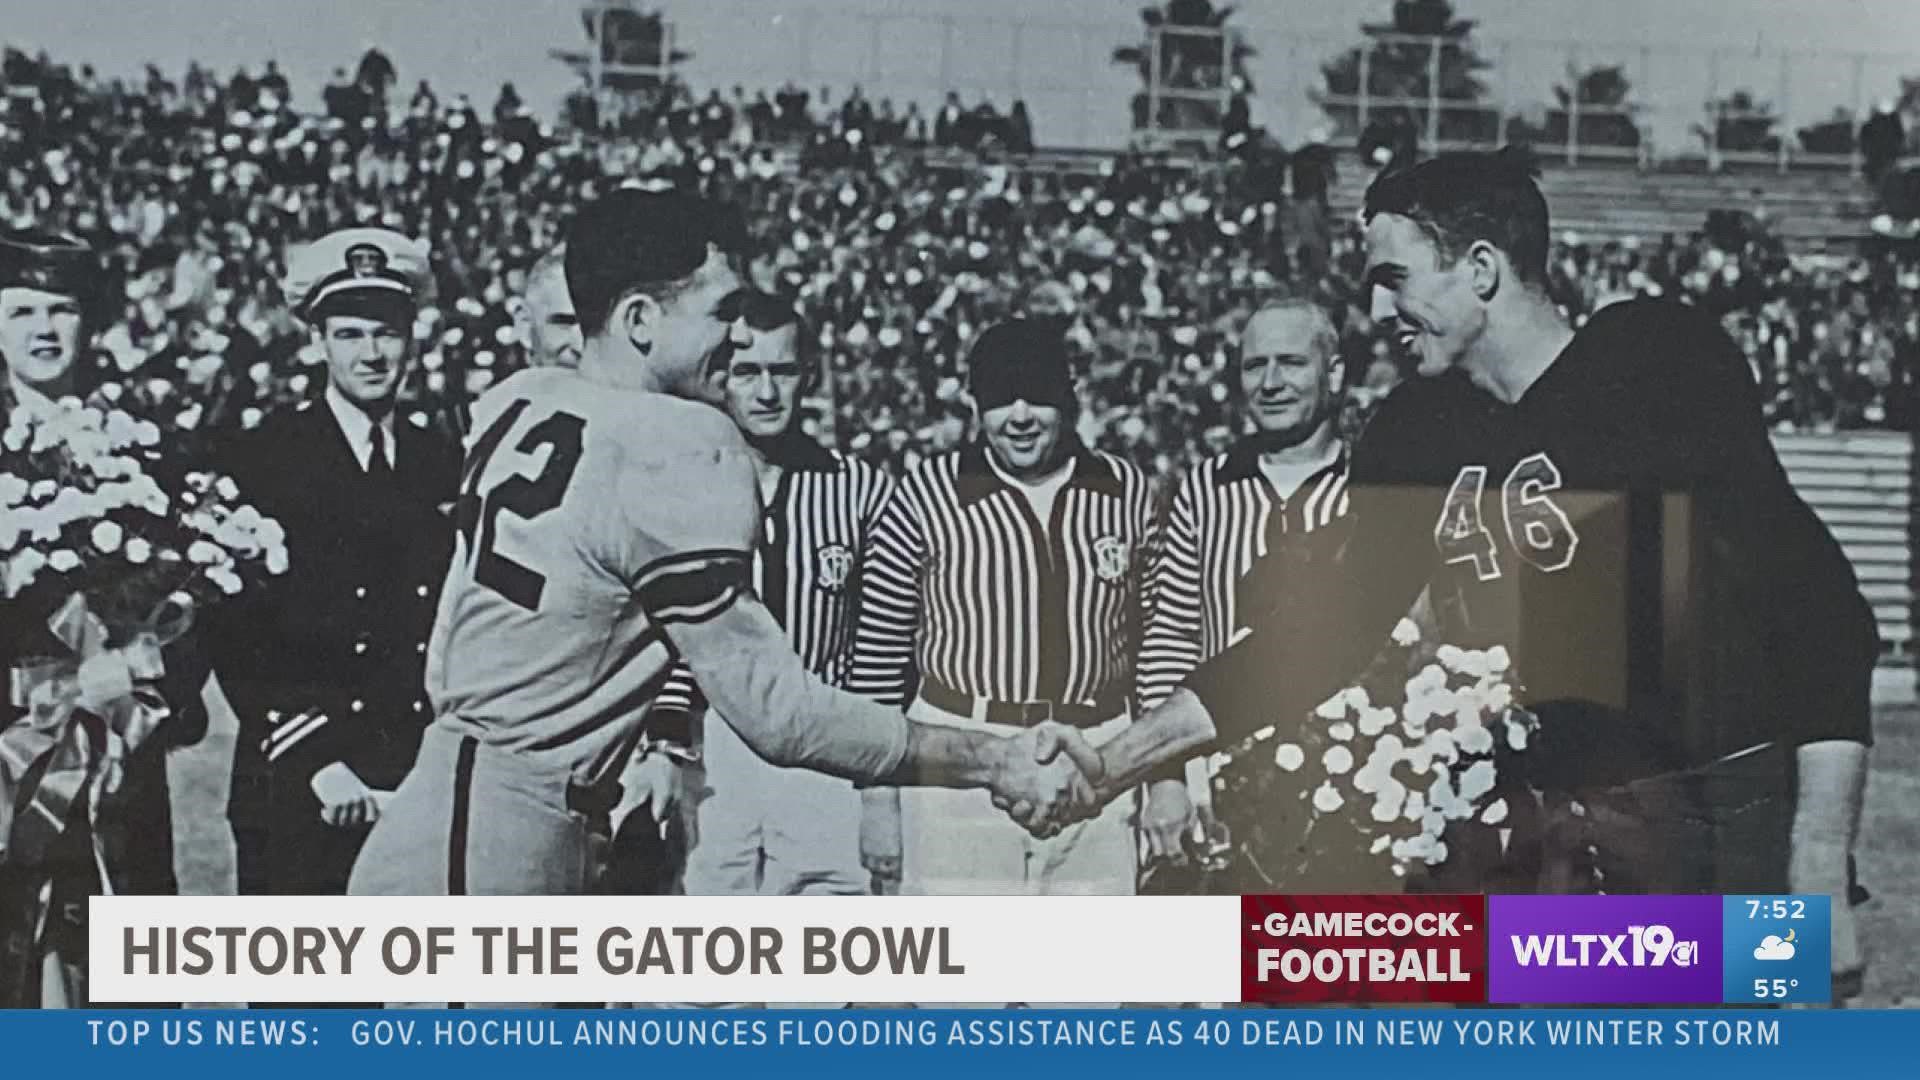 The South Carolina Gamecocks were in the first ever Gator Bowl and their back in 2022.